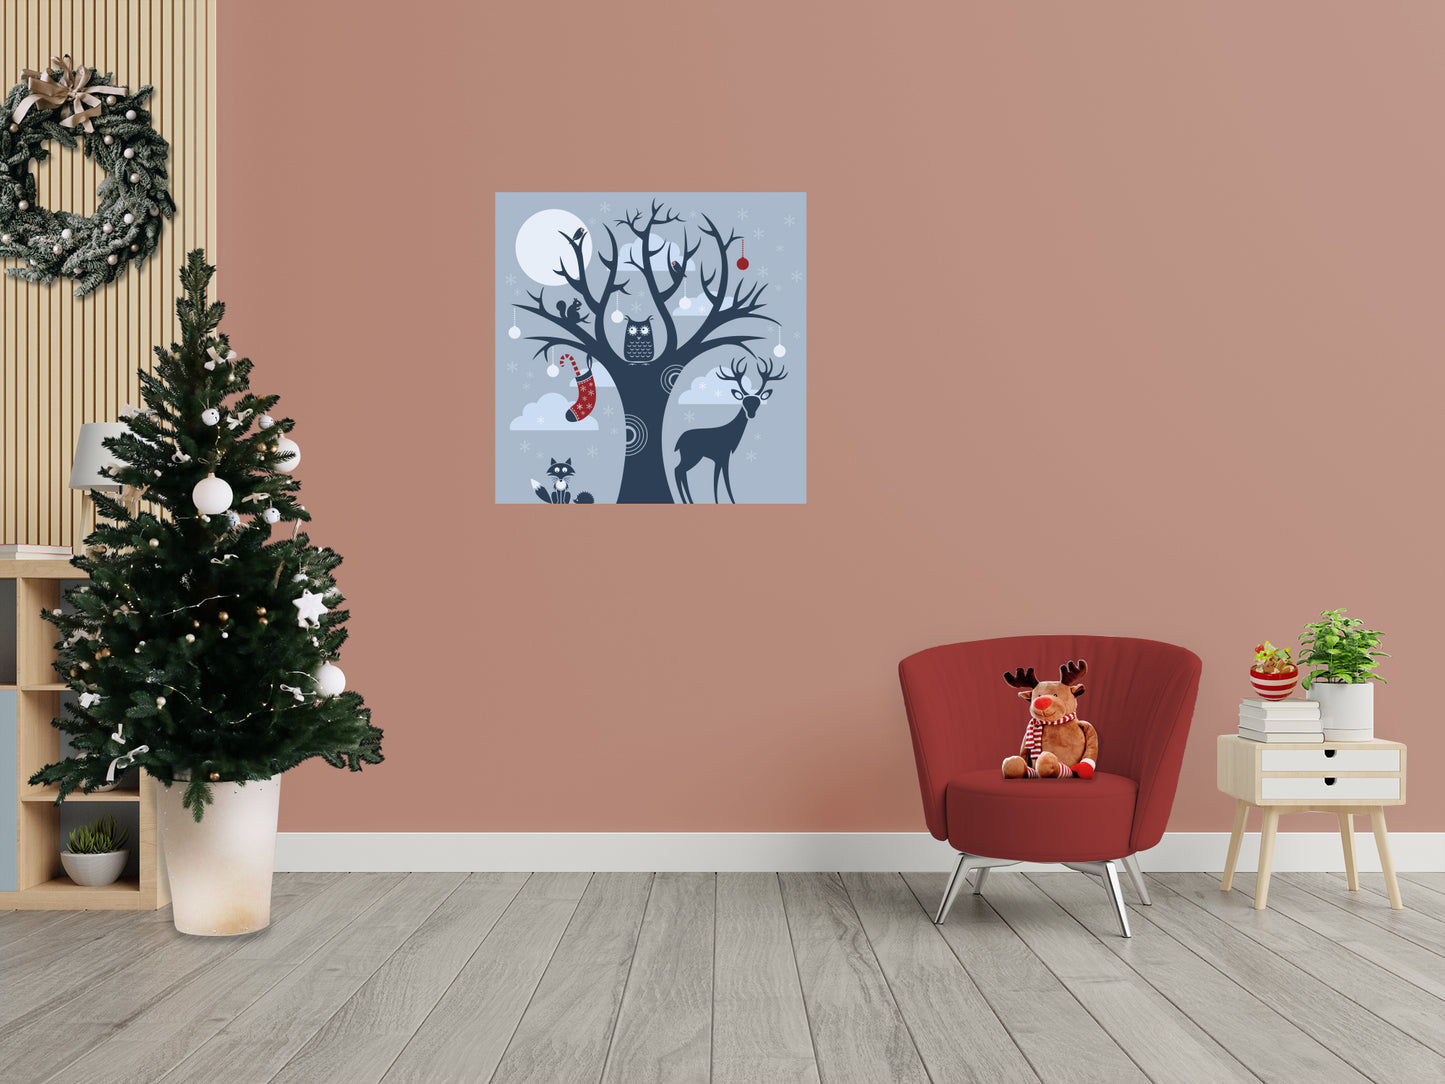 Seasons Decor: Winter in the Forest Mural        -   Removable     Adhesive Decal